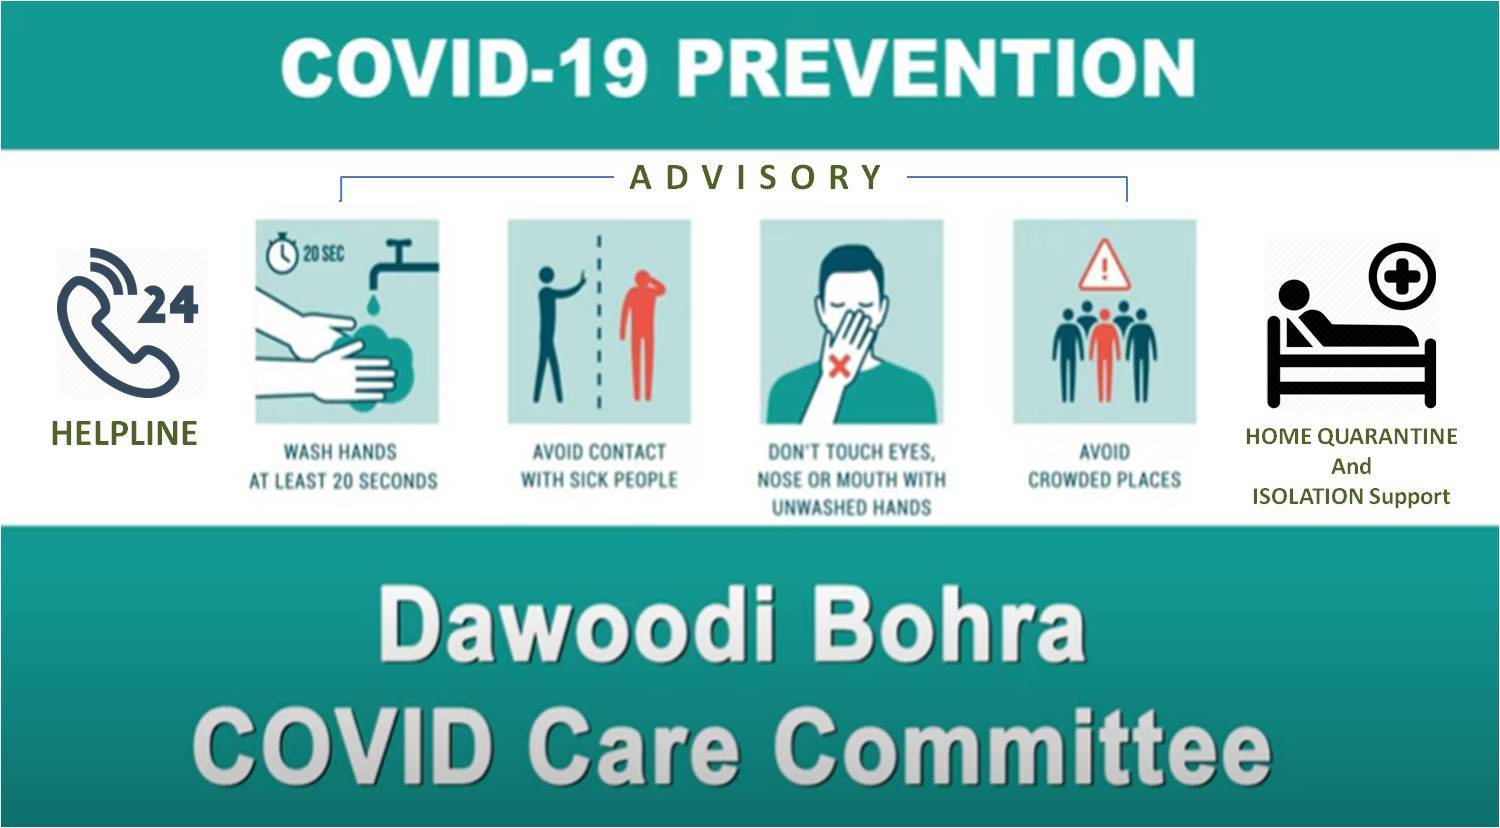 Dawoodi Bohras' of Udaipur launch COVID Care Helpline and community support services